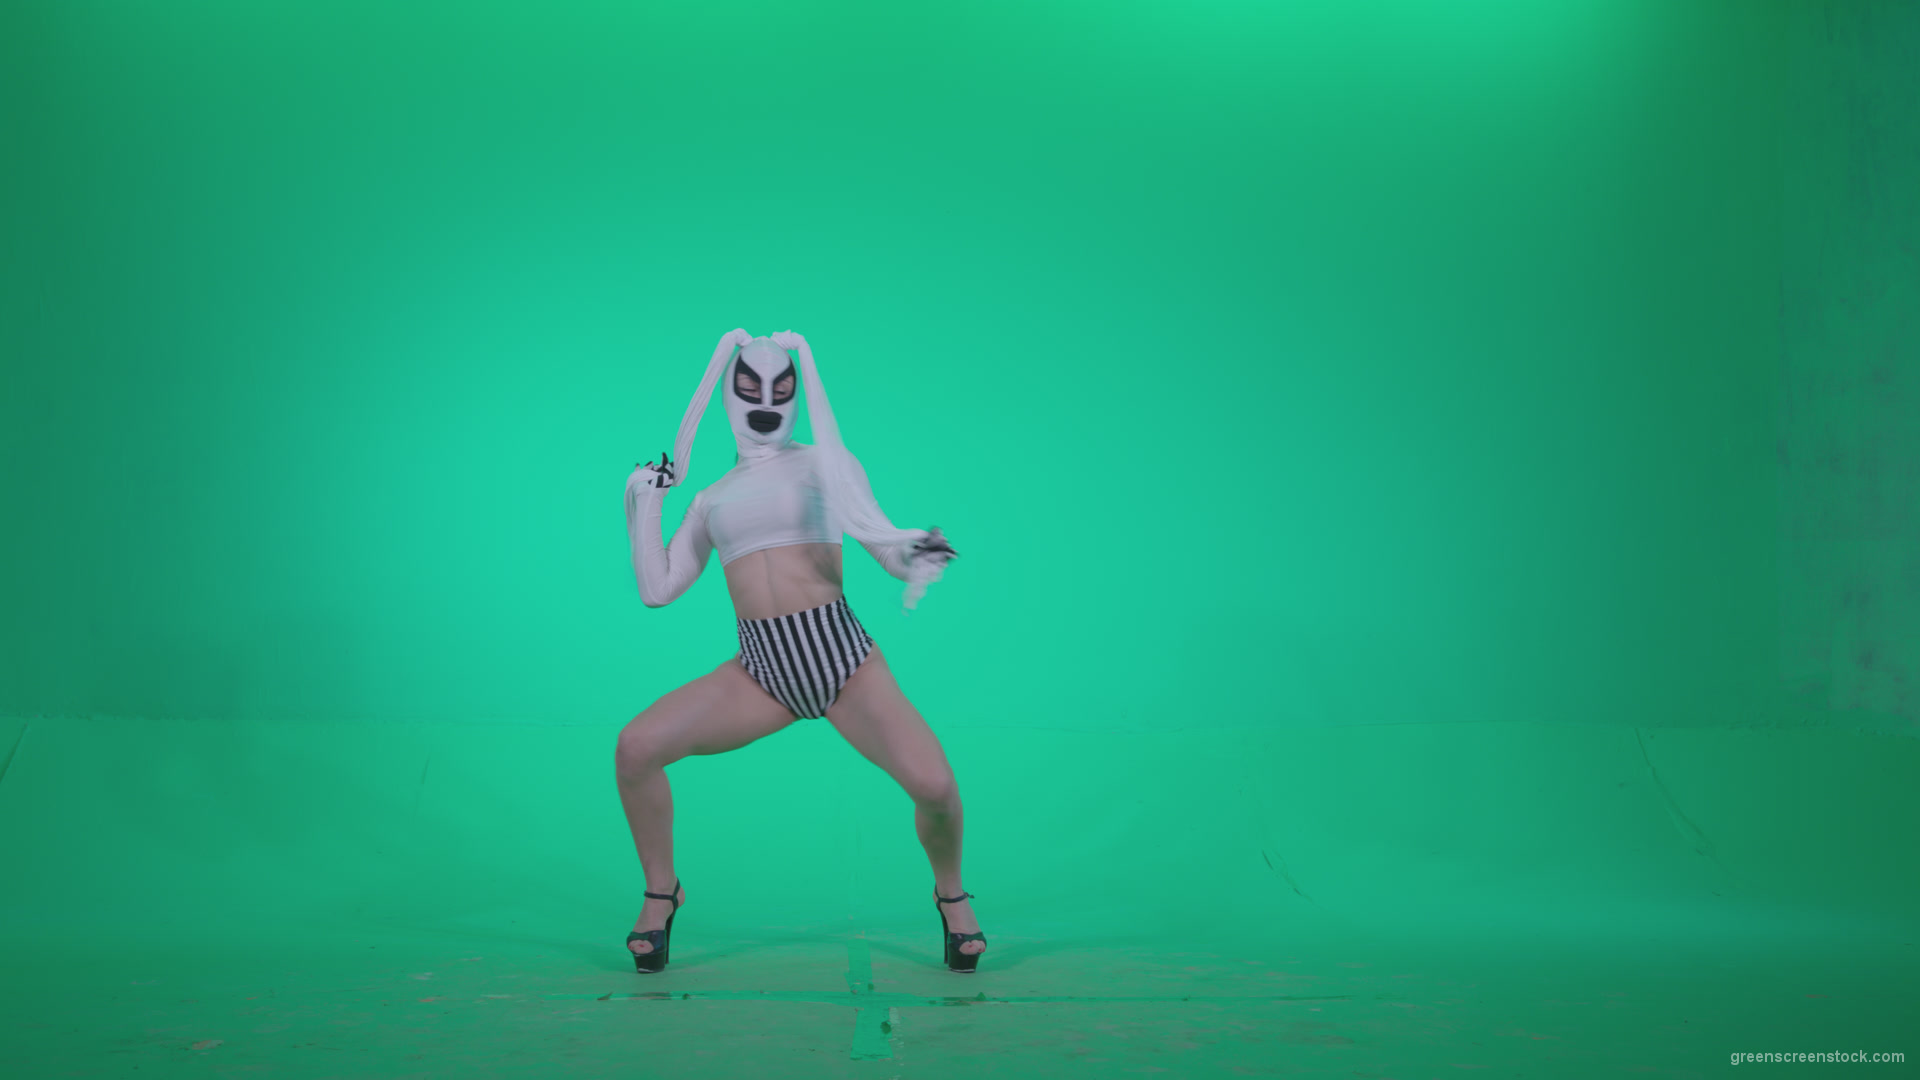 Go-go-Dancer-with-Latex-Top-t1-Green-Screen-Video-Footage_008 Green Screen Stock